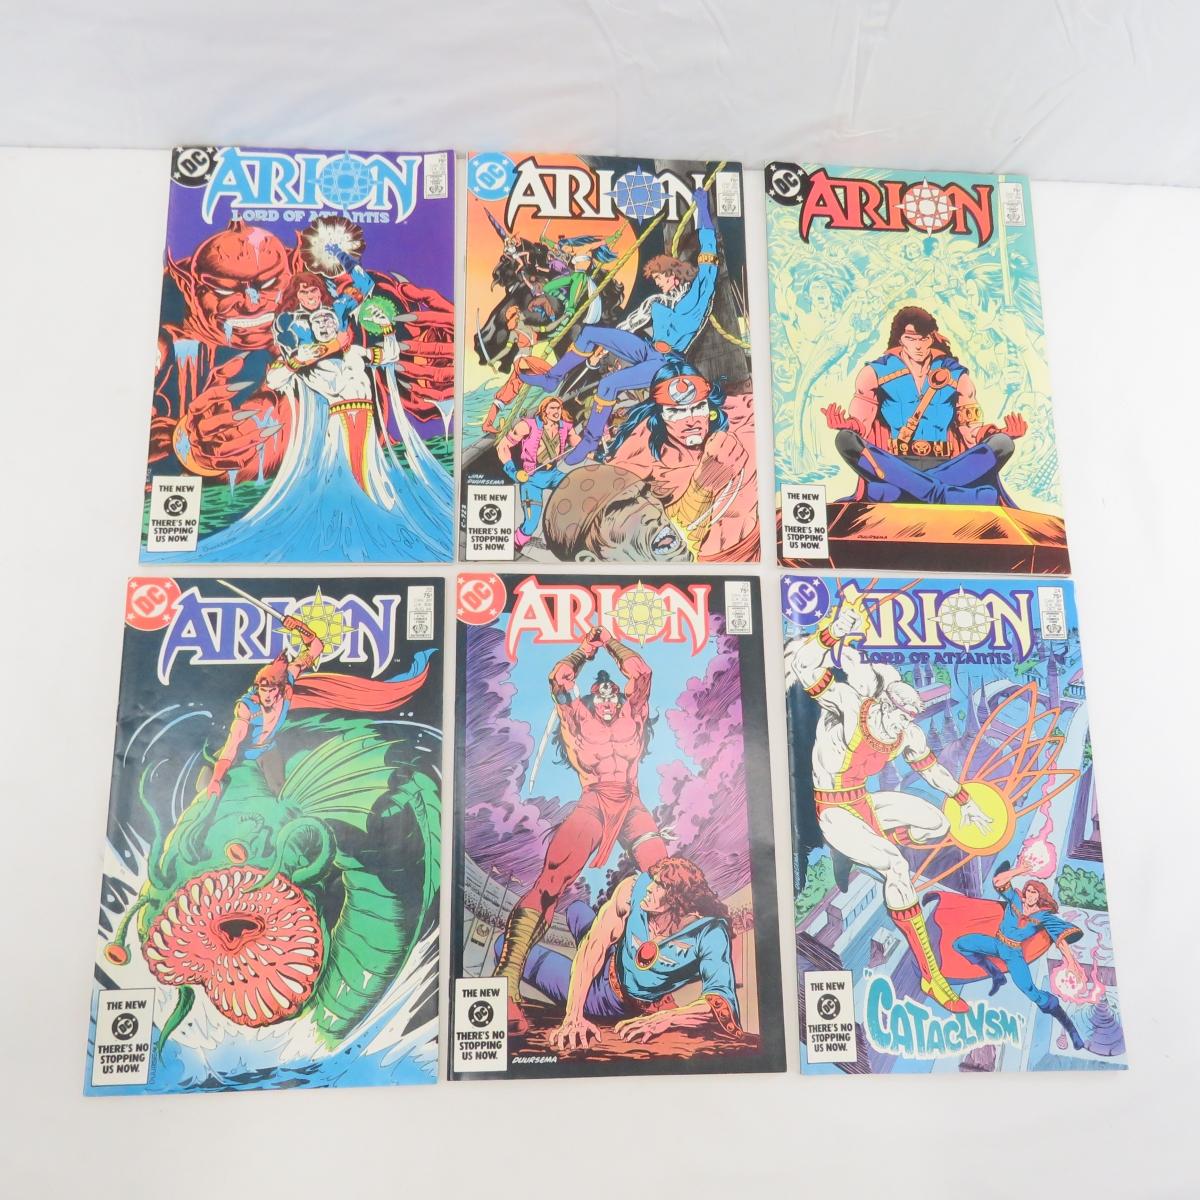 Long Box Of DC Comics Young All Stars, Arion